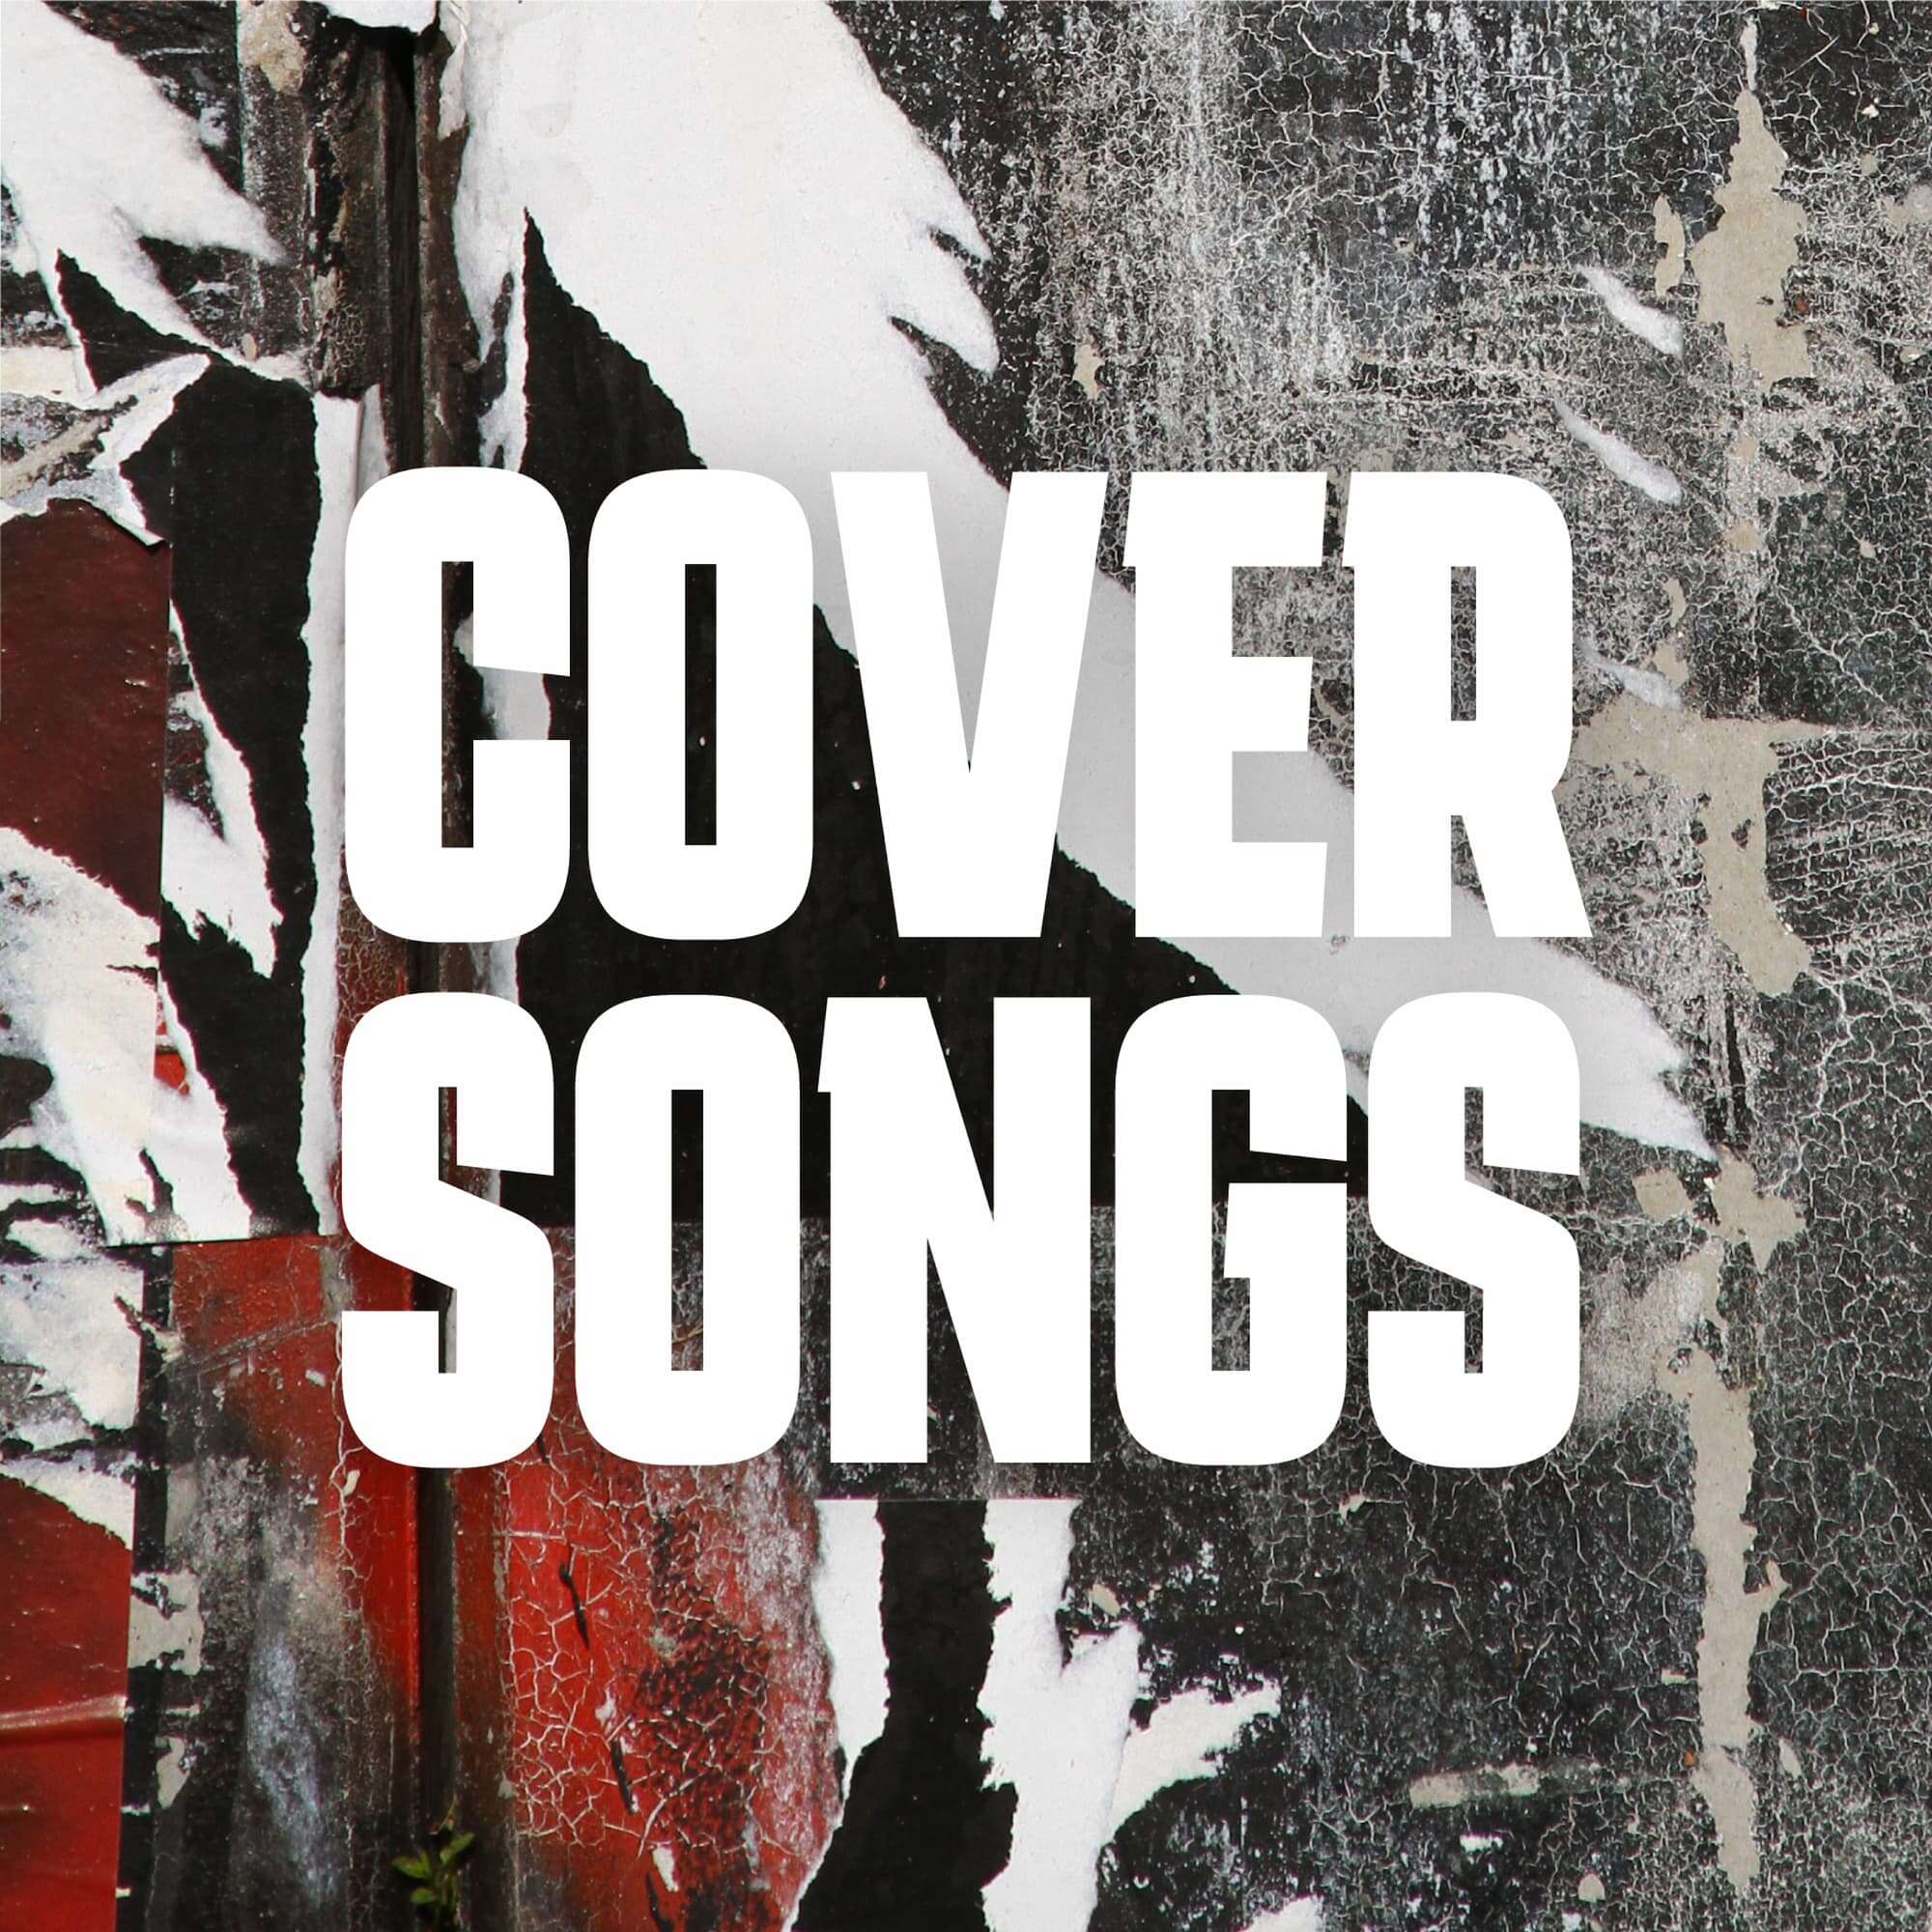 Coversongs